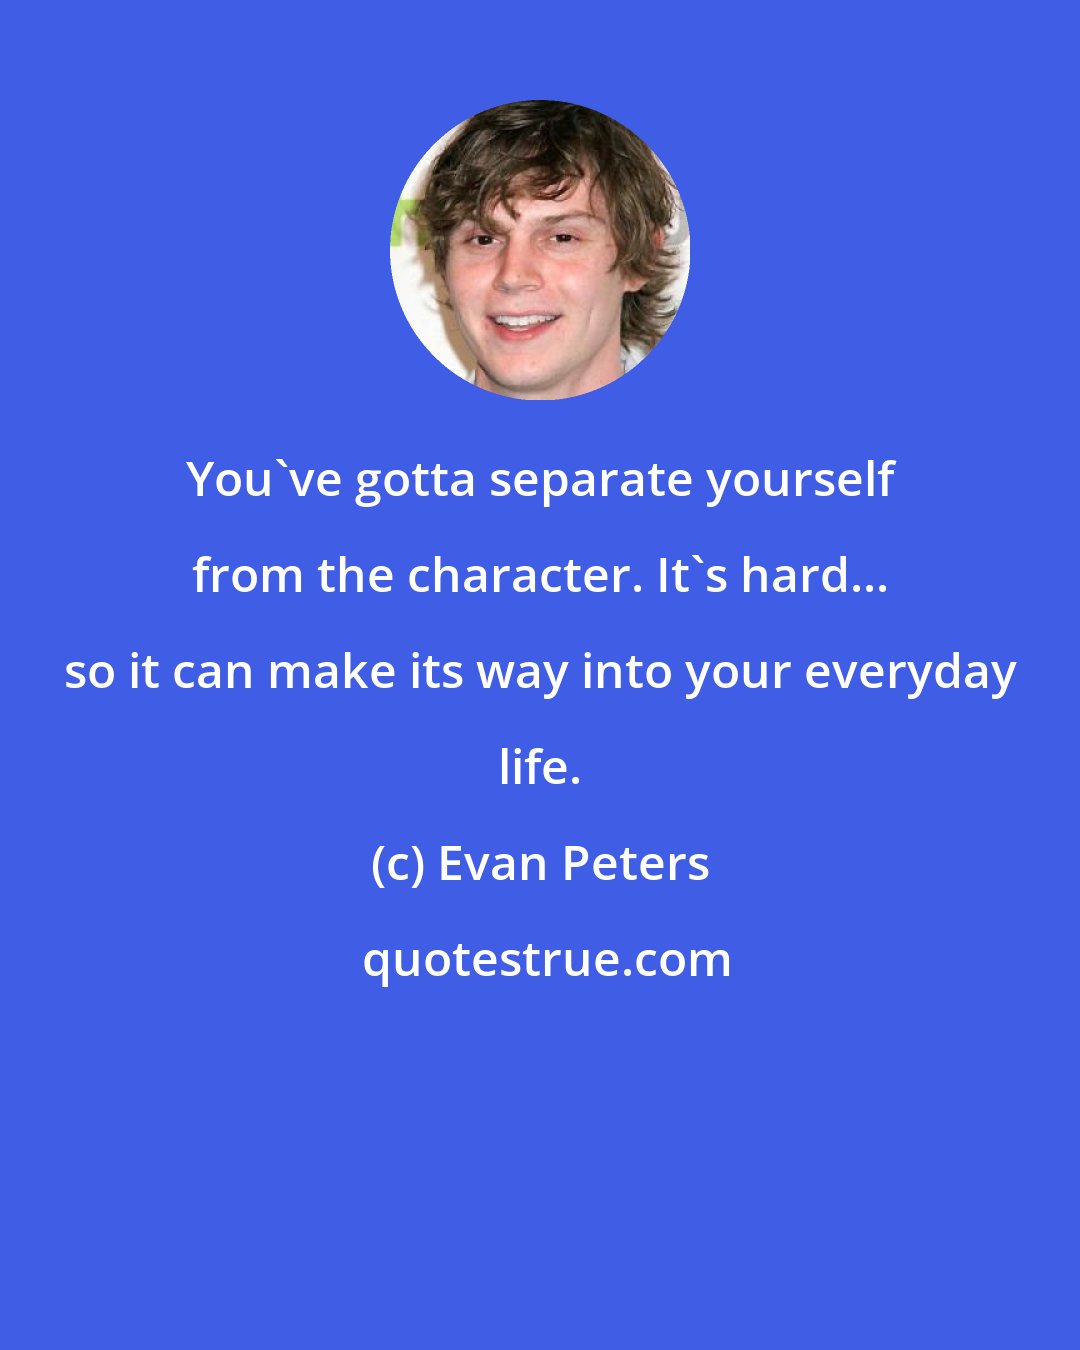 Evan Peters: You've gotta separate yourself from the character. It's hard... so it can make its way into your everyday life.